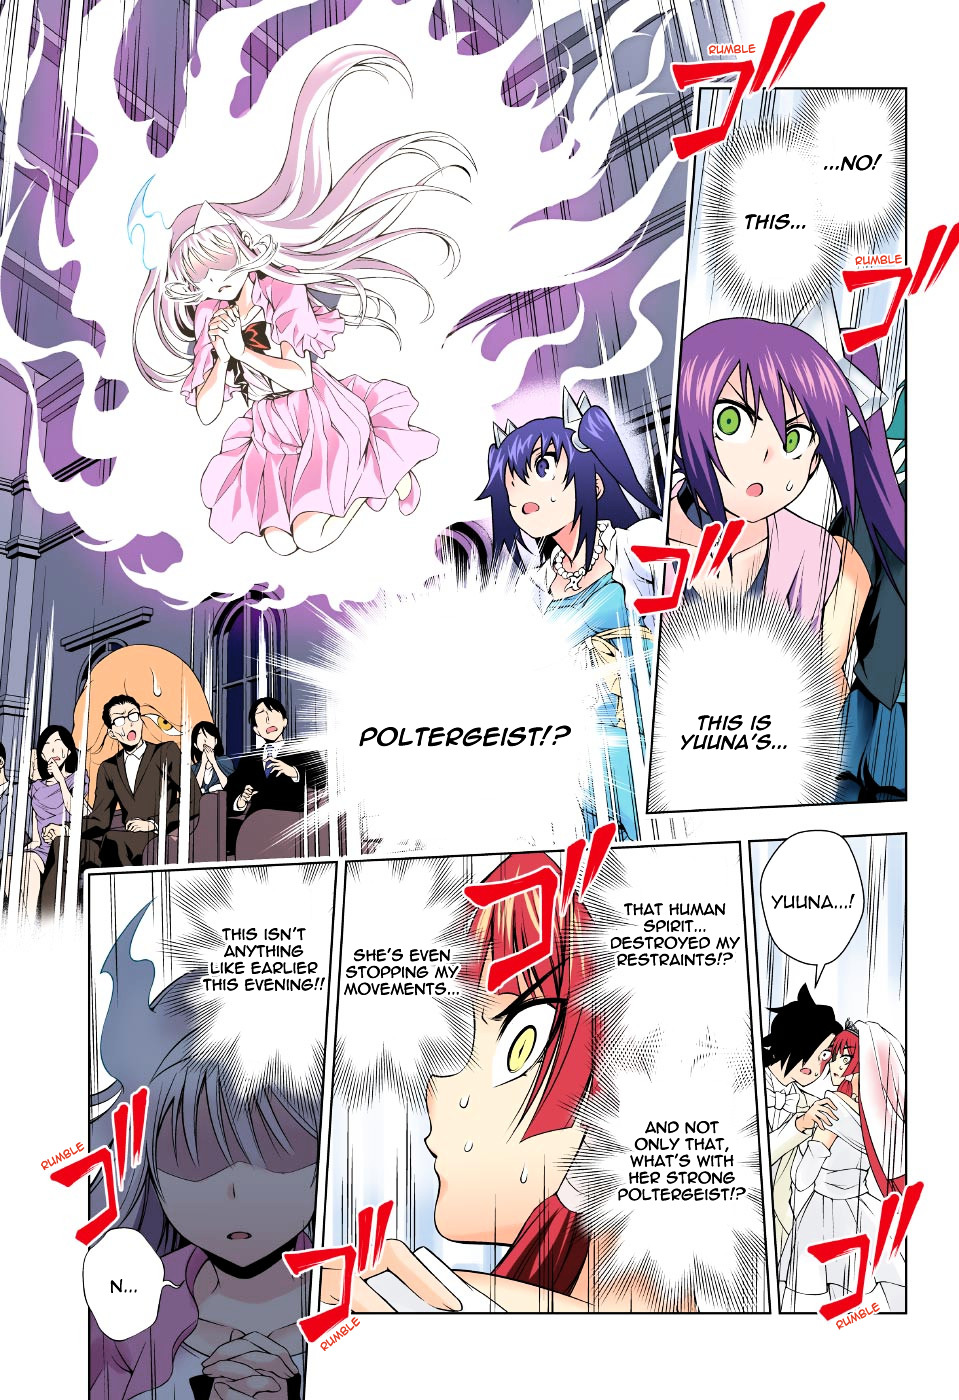 Yuragi-Sou No Yuuna-San Chapter 64 V2 : What The Heck Are You, Yuna-San? (Color) - Picture 3